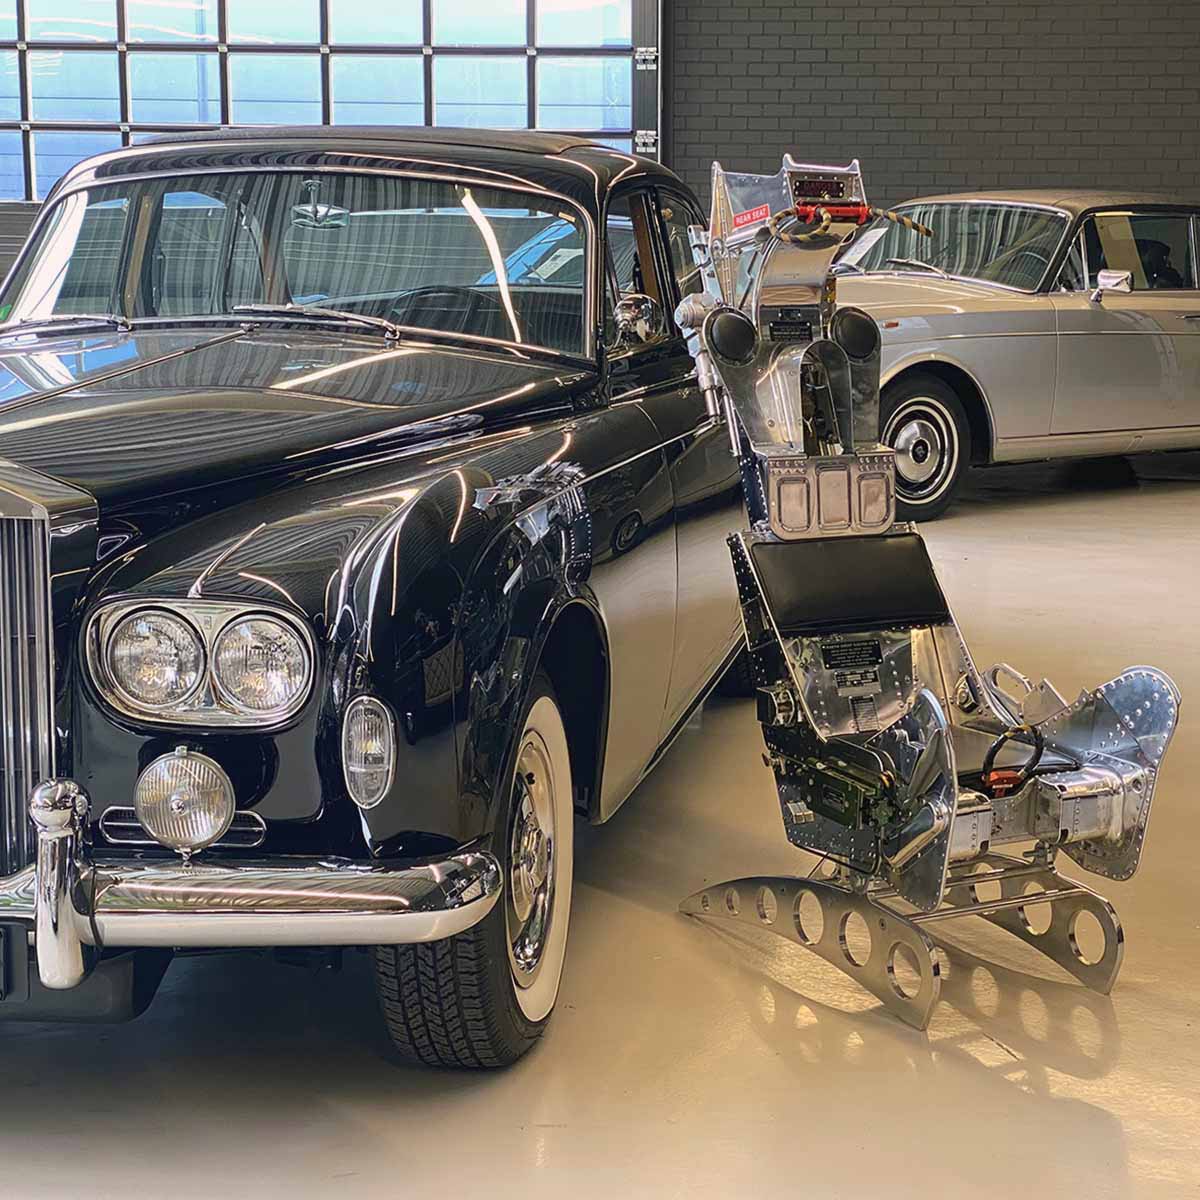 Polished Martin-Baker ejection seat next to two Rolls-Royce cars.